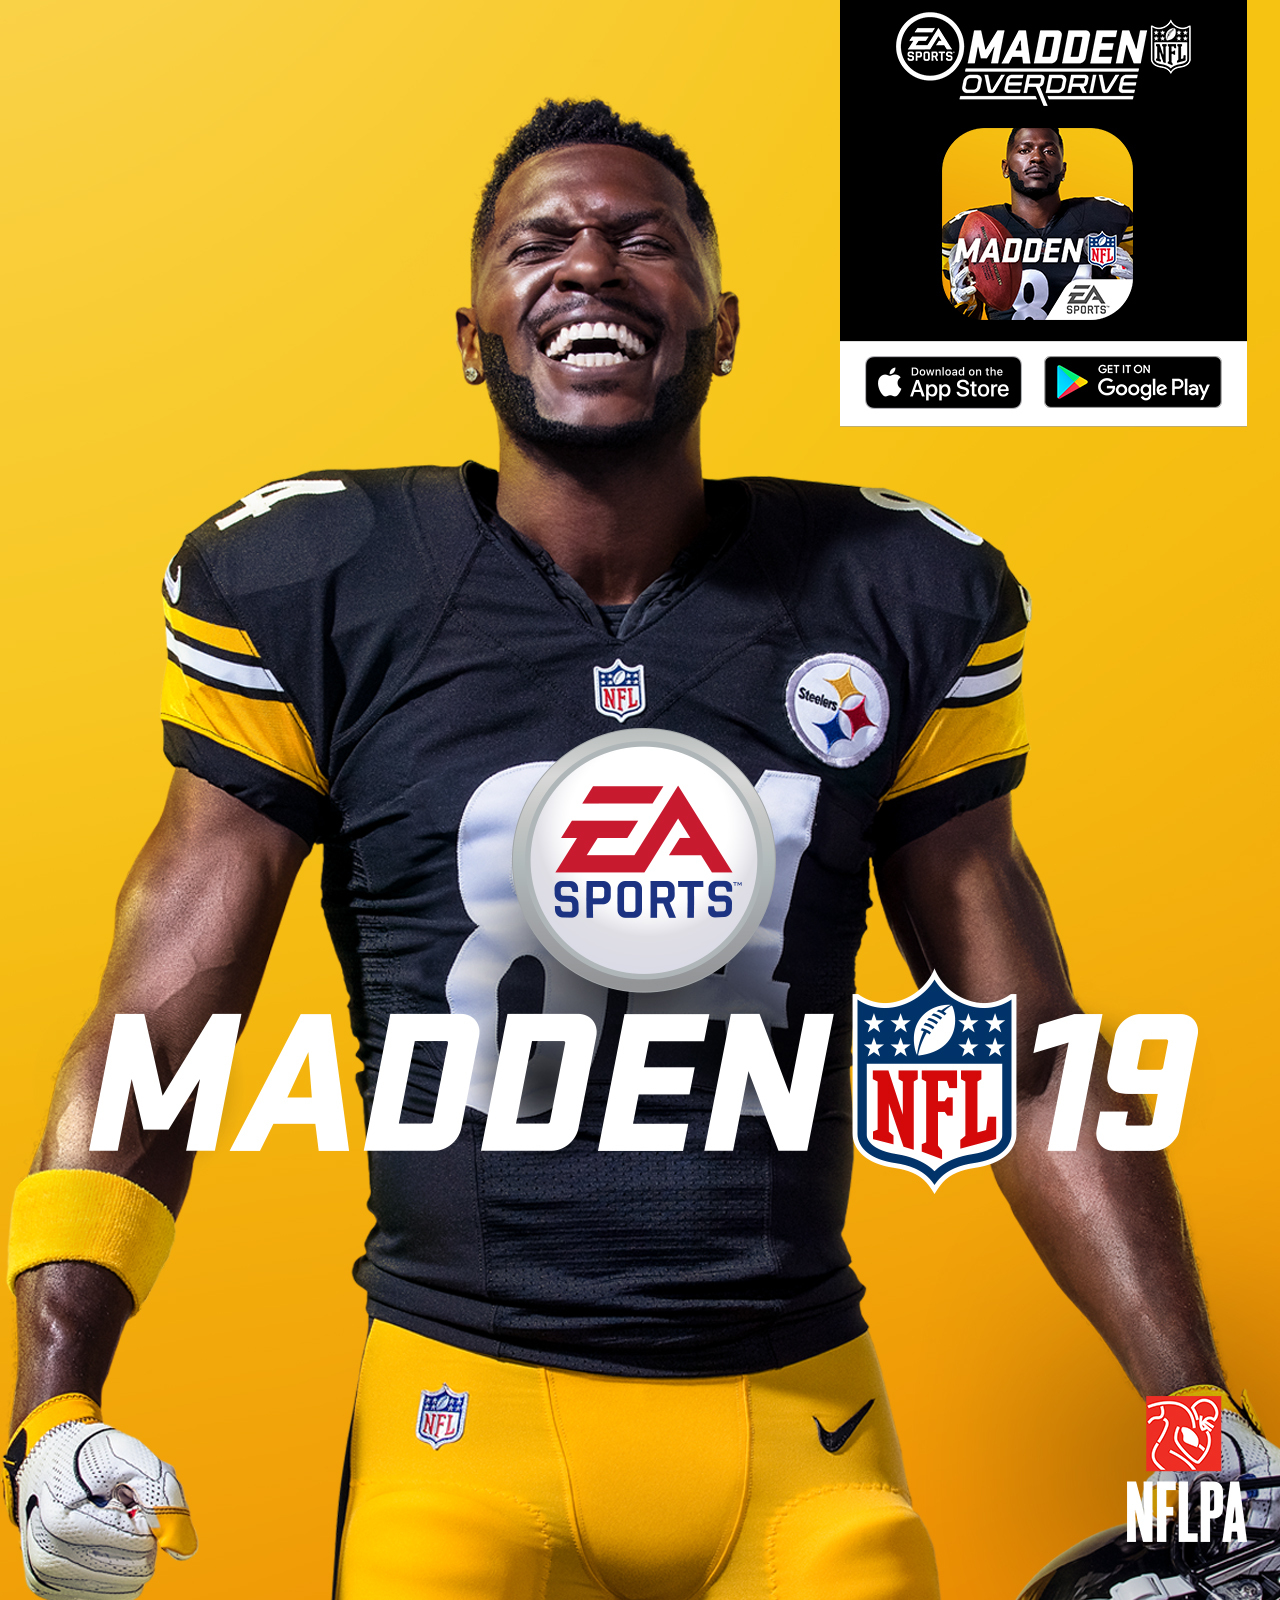 Antonio Brown Named as Official EA Sports Madden NFL 19 Cover Athlete,  Worldwide Launch August 10th